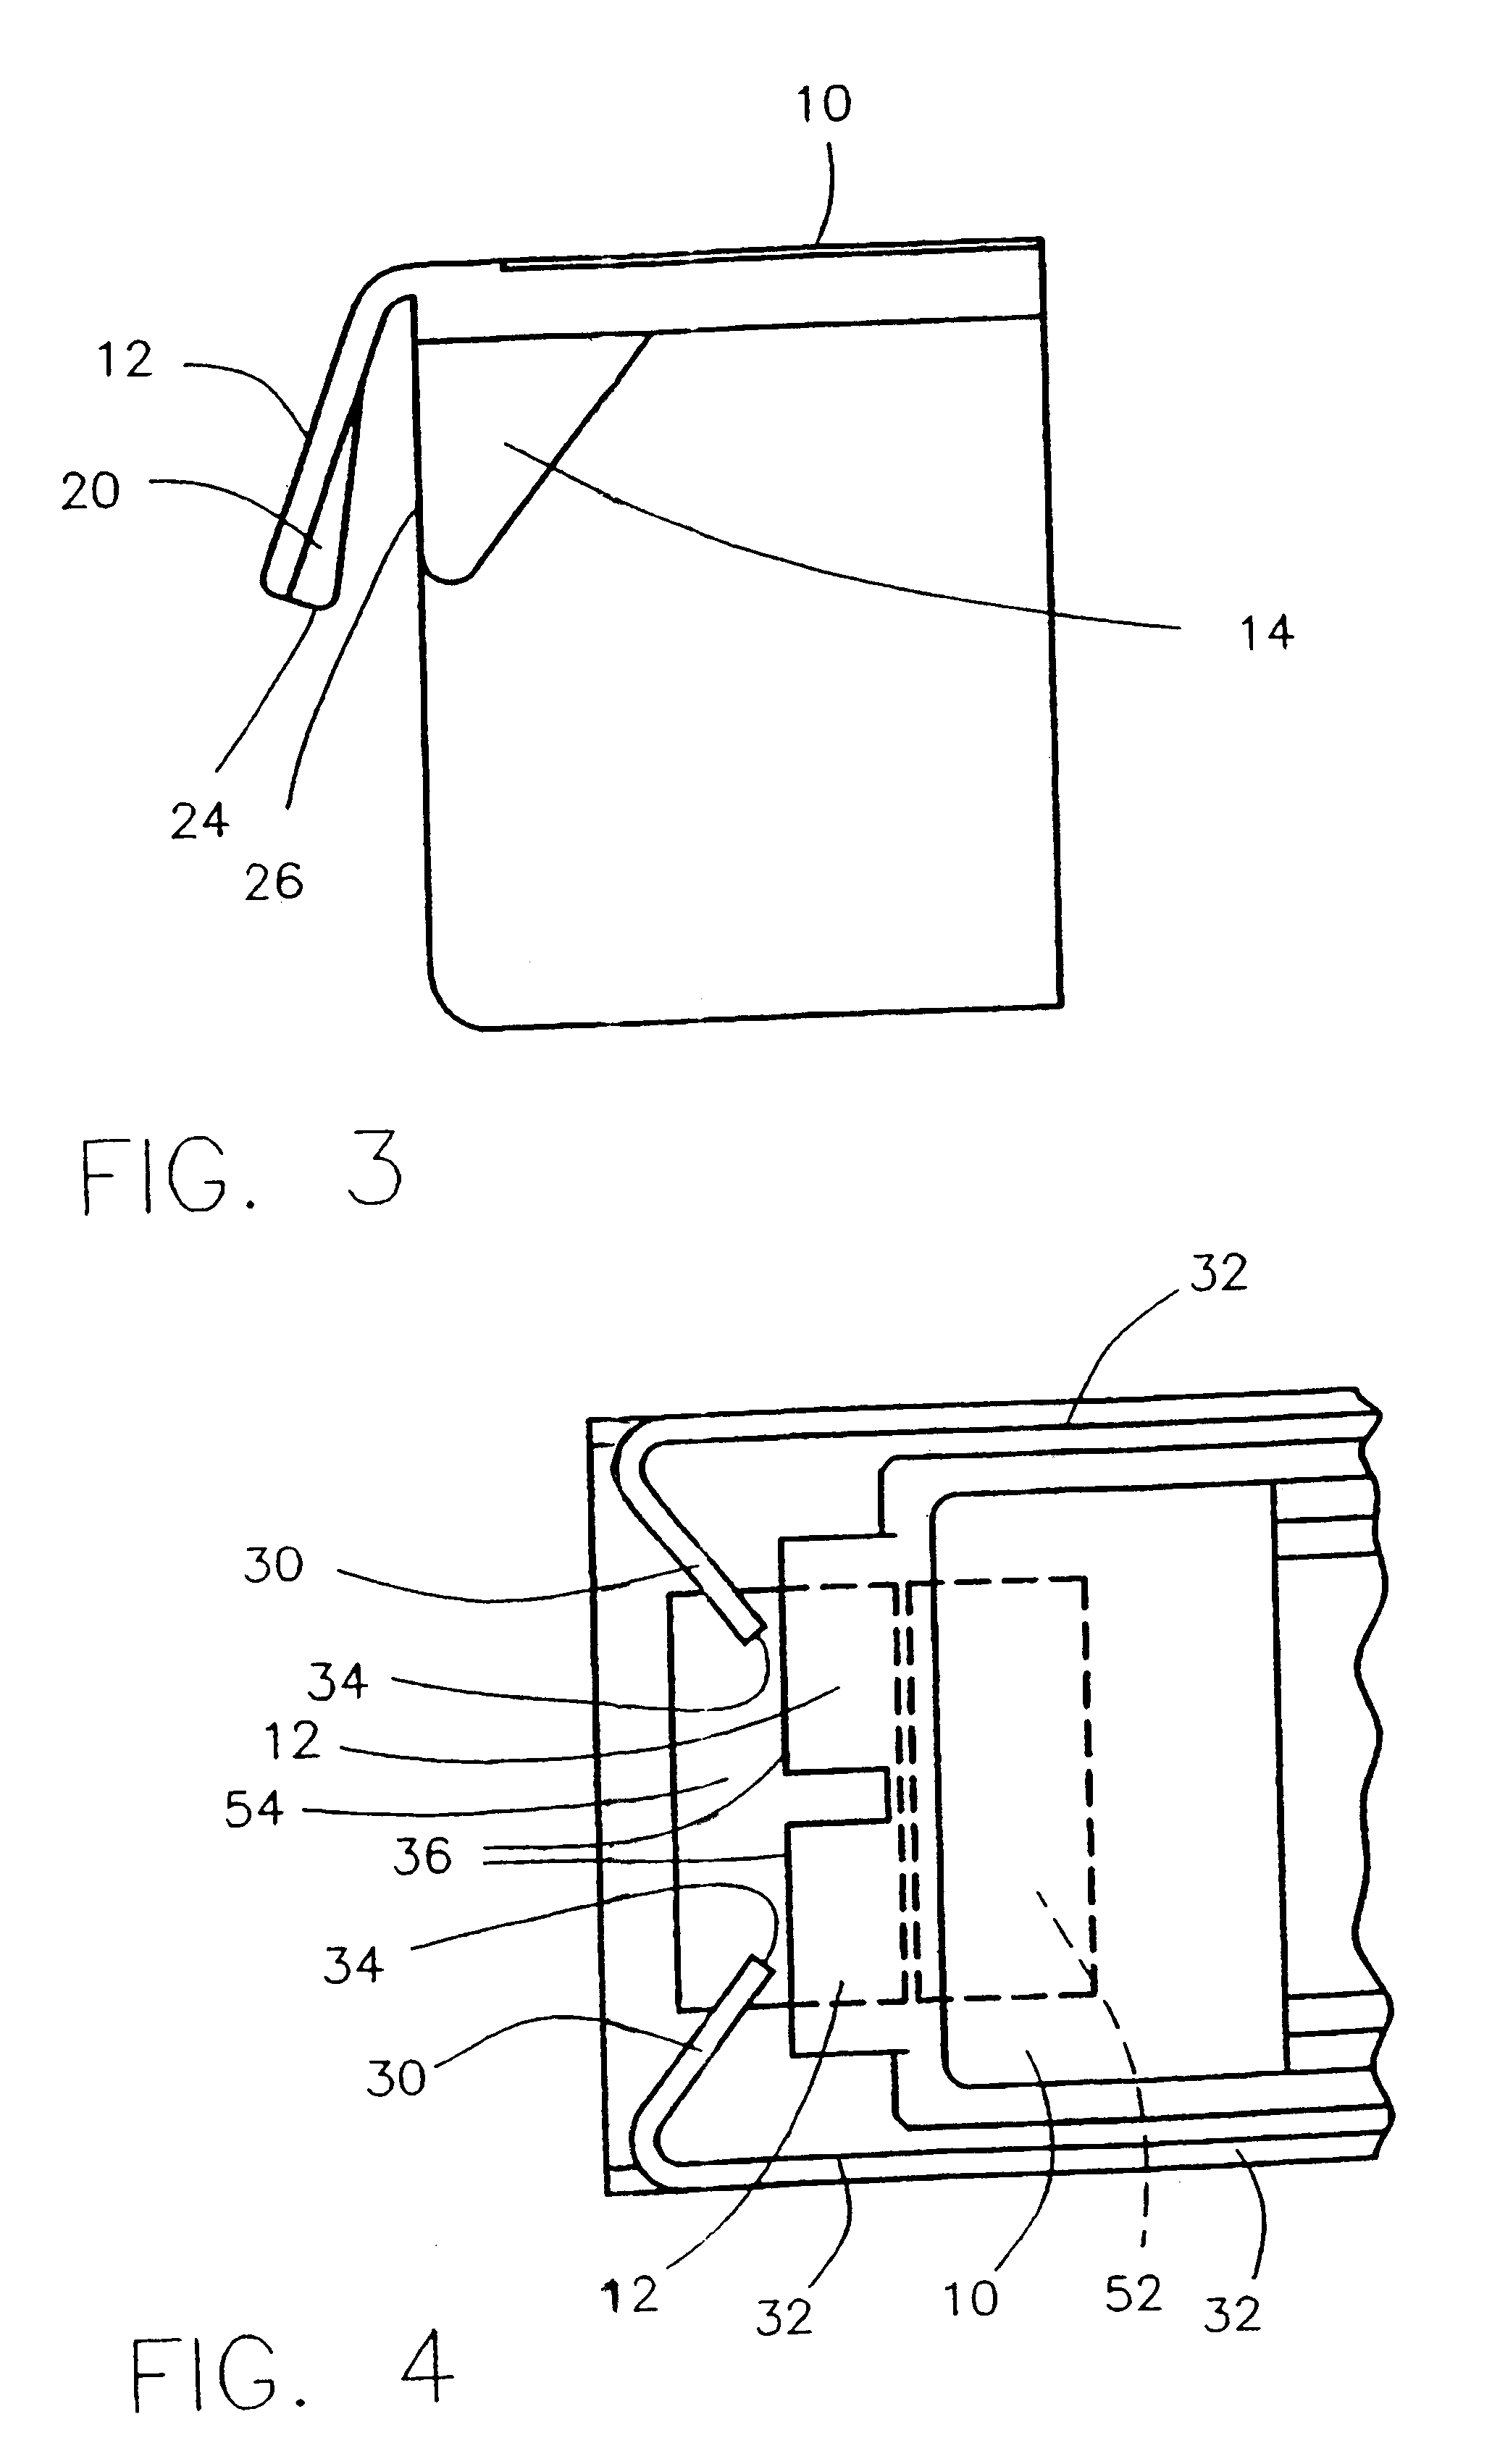 Enhanced module kick-out spring mechanism for removable small form factor optical transceivers